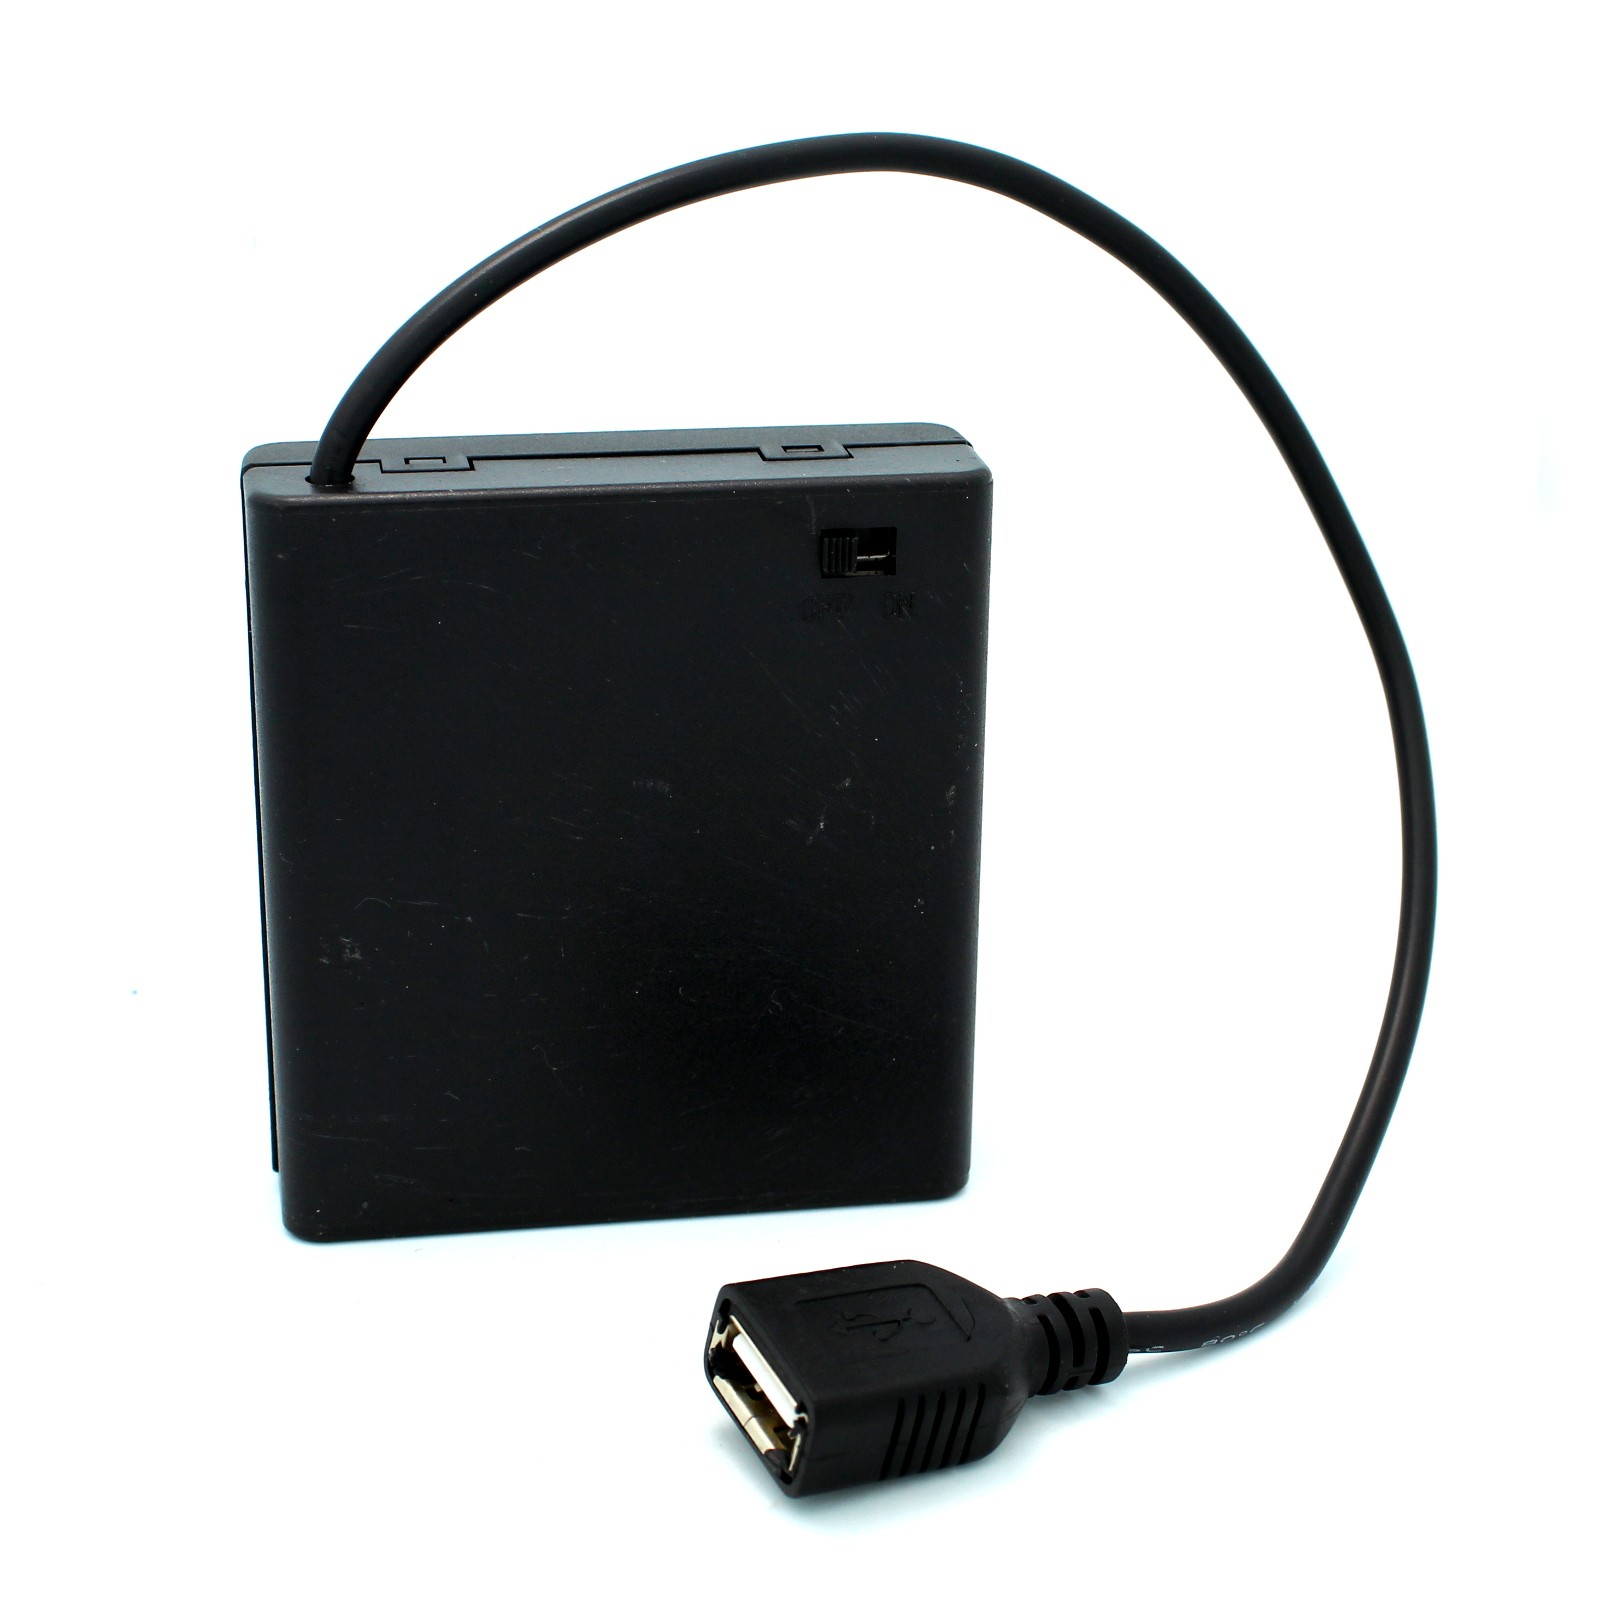 $4.25 - Raspberry Pi Battery Pack: 4 AA Battery Holder with USB Output -  Tinkersphere